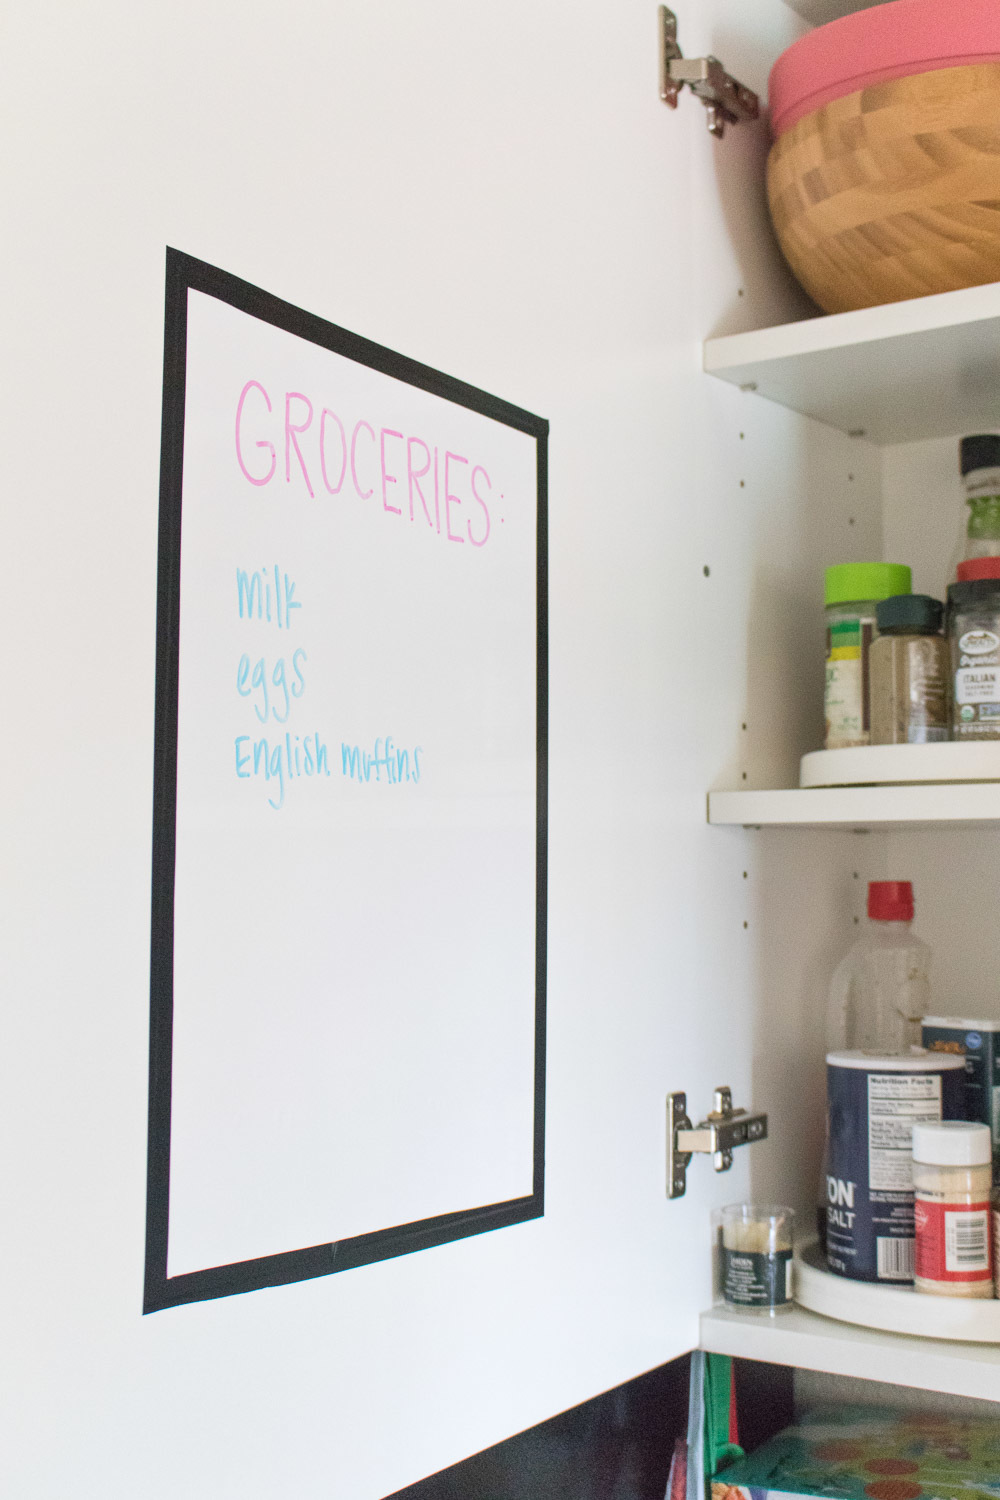 Renter-friendly solution: Removable white board (hidden out of sight!)